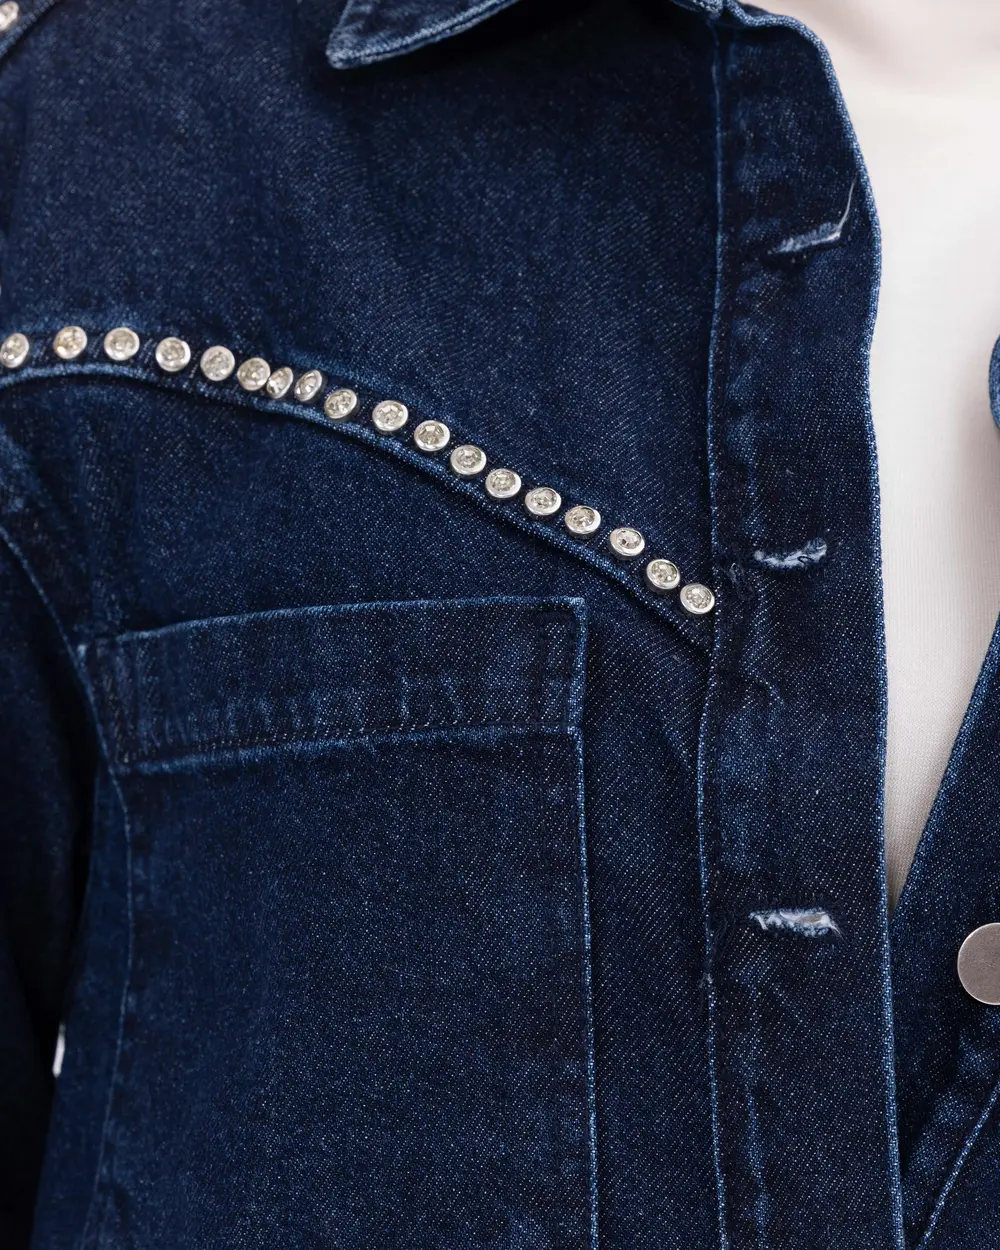 Stone Detailed Pocketed Jean Jacket